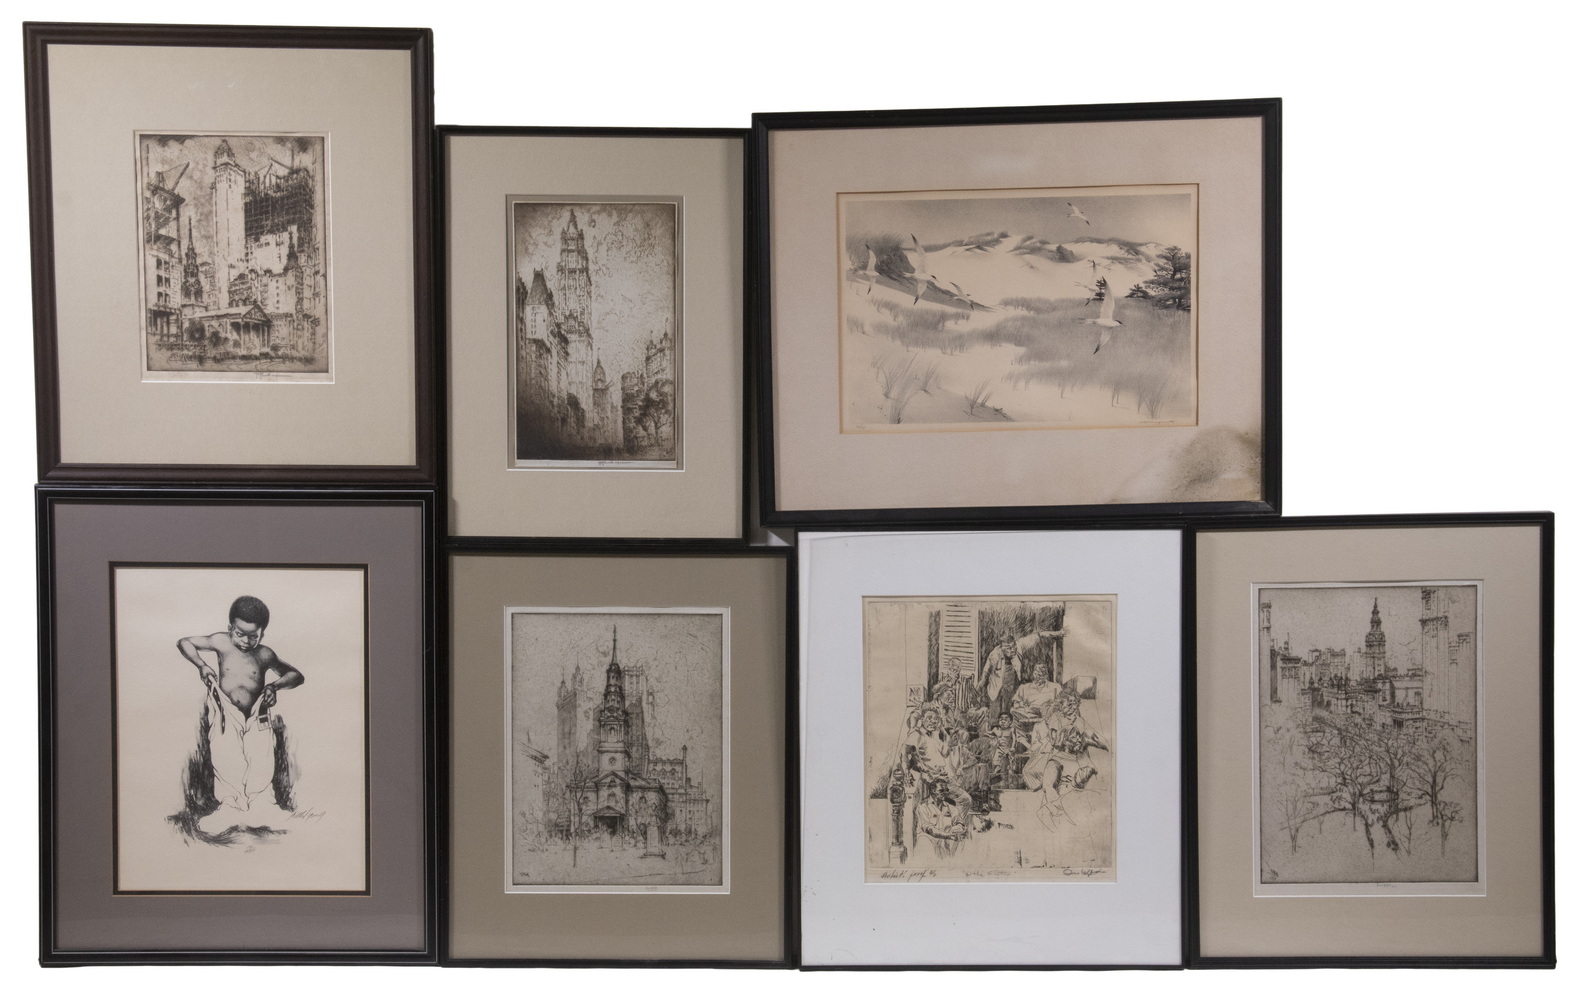  GROUP OF 7 FRAMED ETCHINGS 1910 S 70 S 3b661f